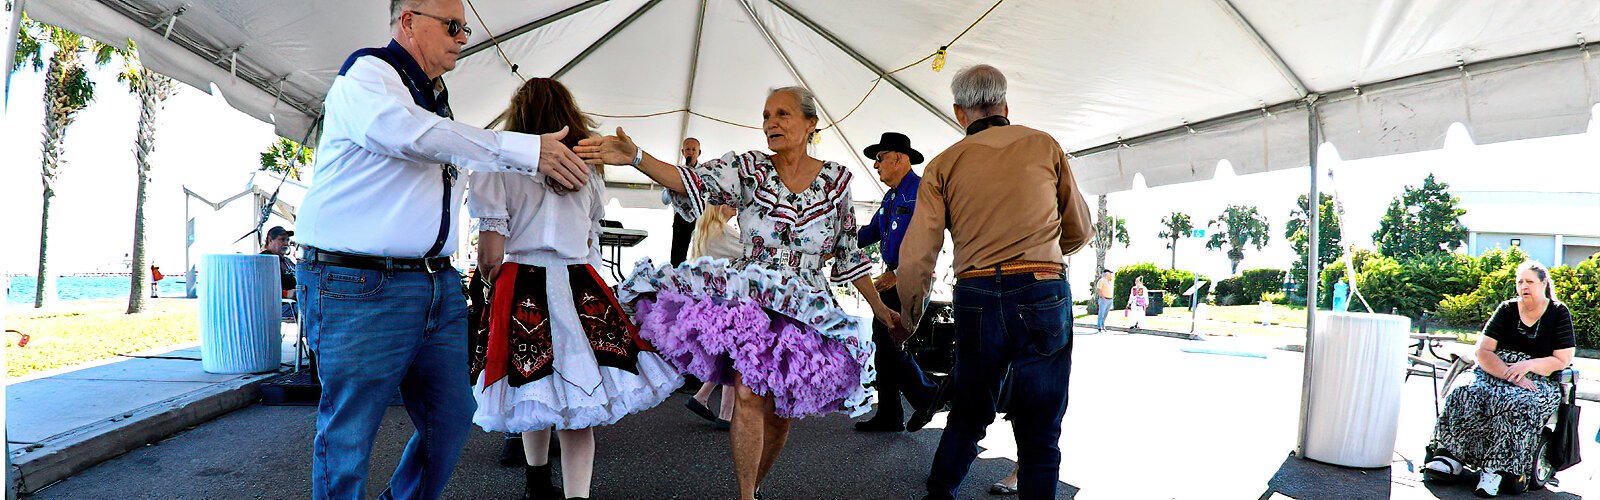 The dance club Promenade Squares participates in the International Folk Fair with their lively American square dances.